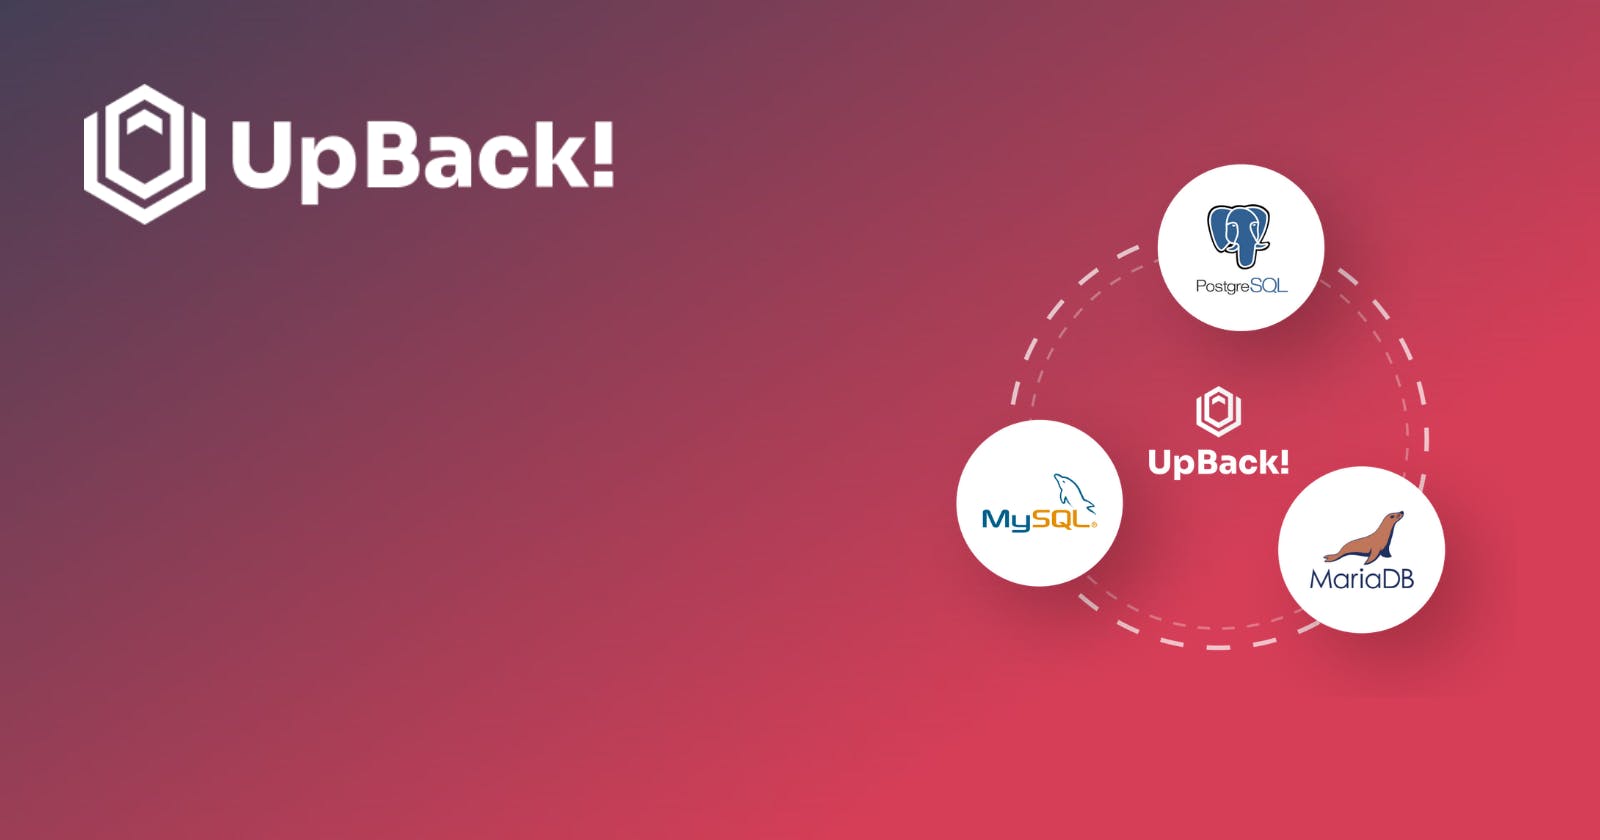 Understanding Backups: What They Are and 

How UpBack! Enhances Them